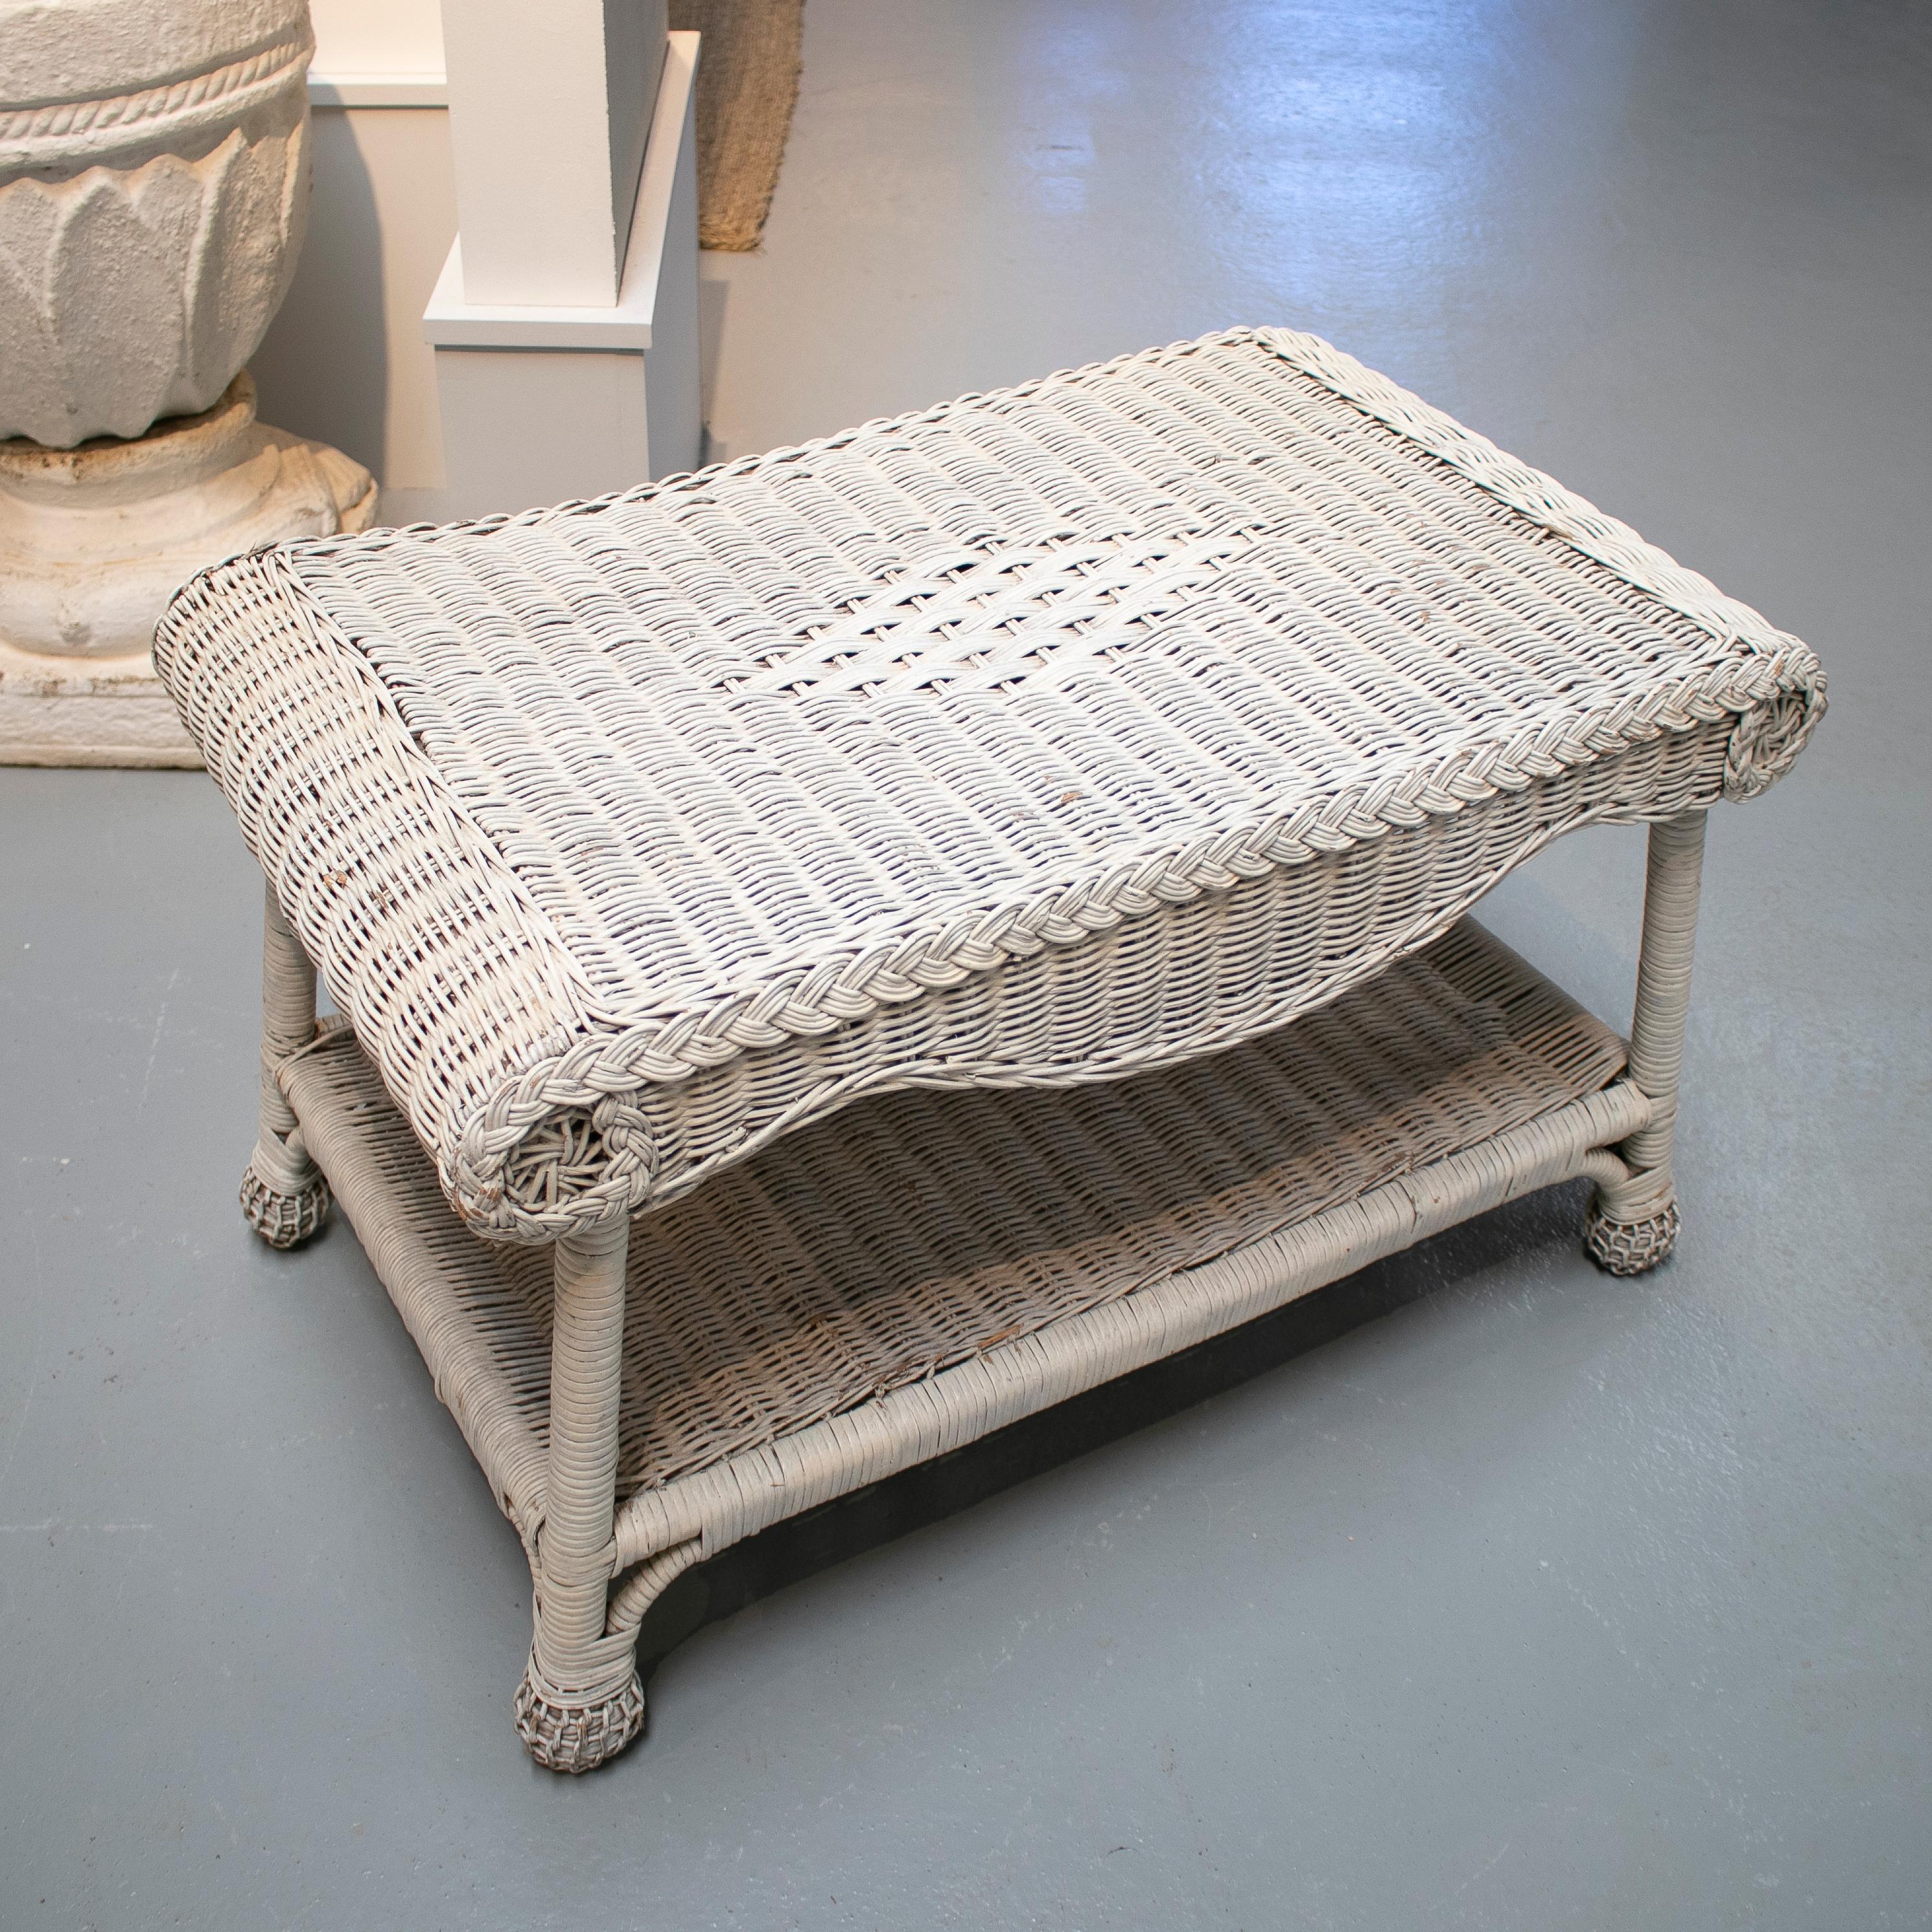 1970s Spanish hand woven wicker side table painted white.